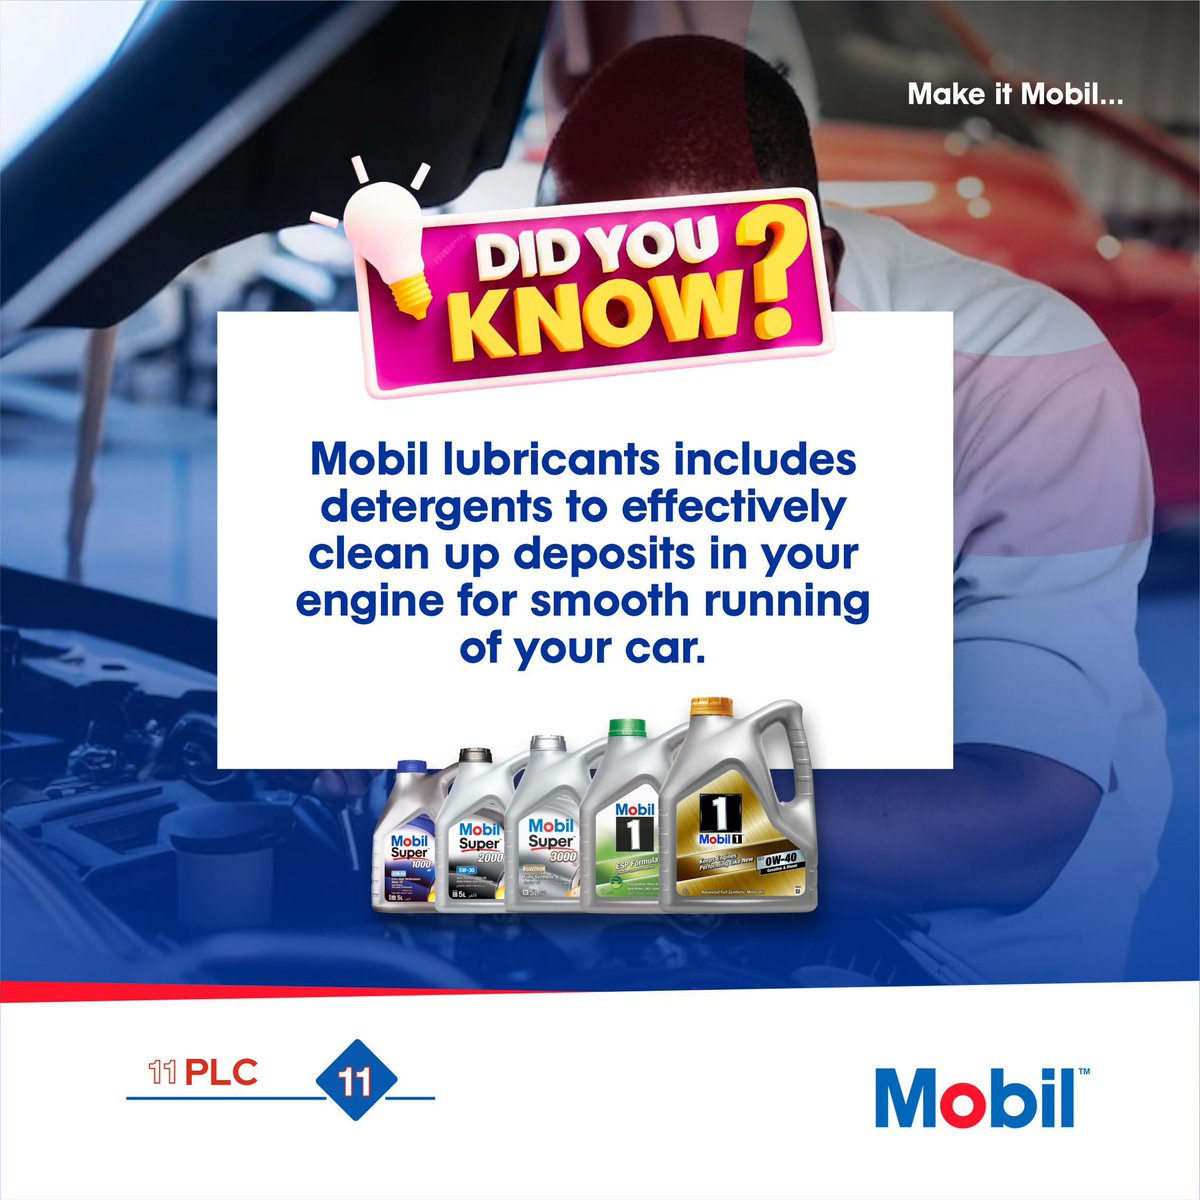 Keep your car running smoothly with Mobil Lubricants, specifically formulated with detergents to clean up deposits and improve performance.

#carcare #didyouknow #enginecare #mobillubricants #mobilinnigeria